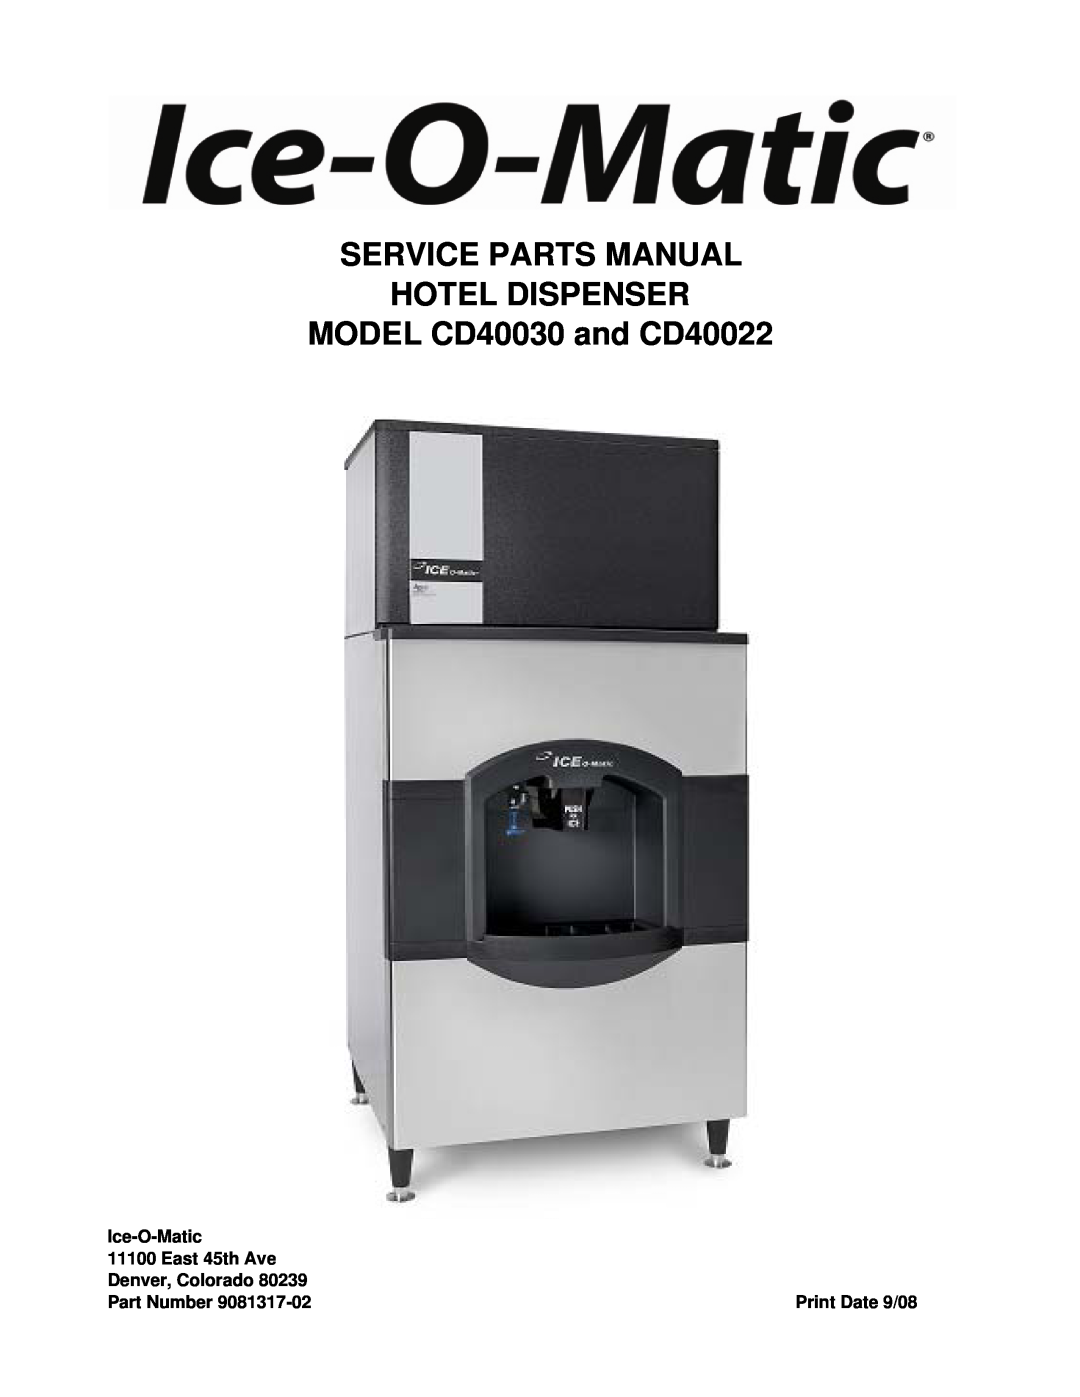 Ice-O-Matic CD40022 Series manual Service Parts Manual Hotel Dispenser, MODEL CD40030 and CD40022, Ice-O-Matic 